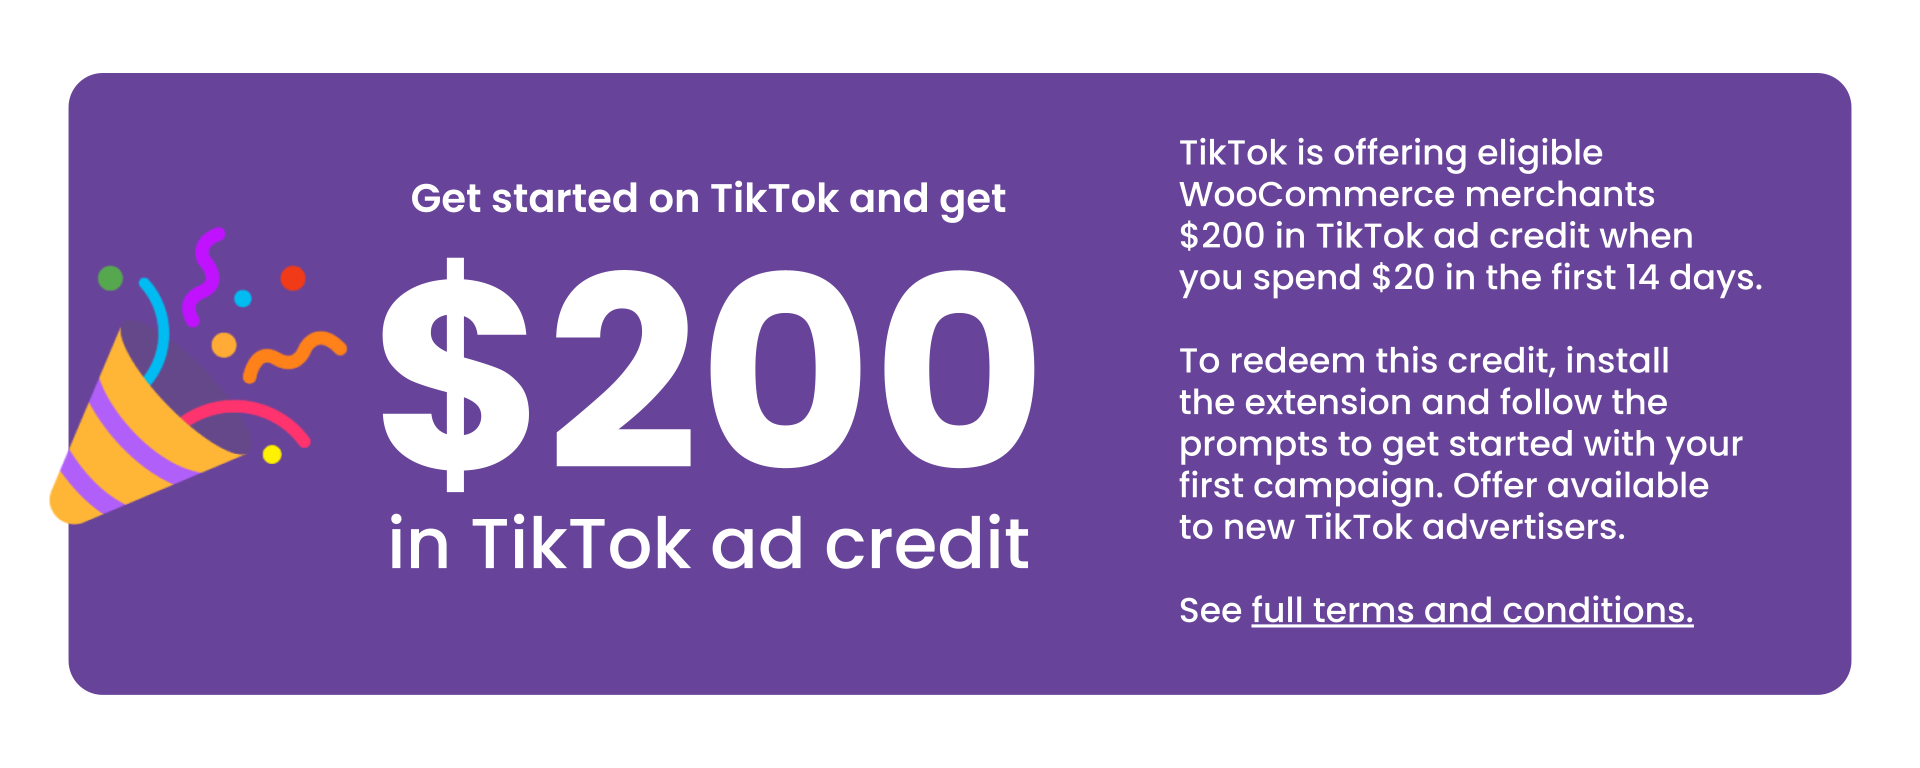 Get $200 in TikTok ad credit with WooCommerce